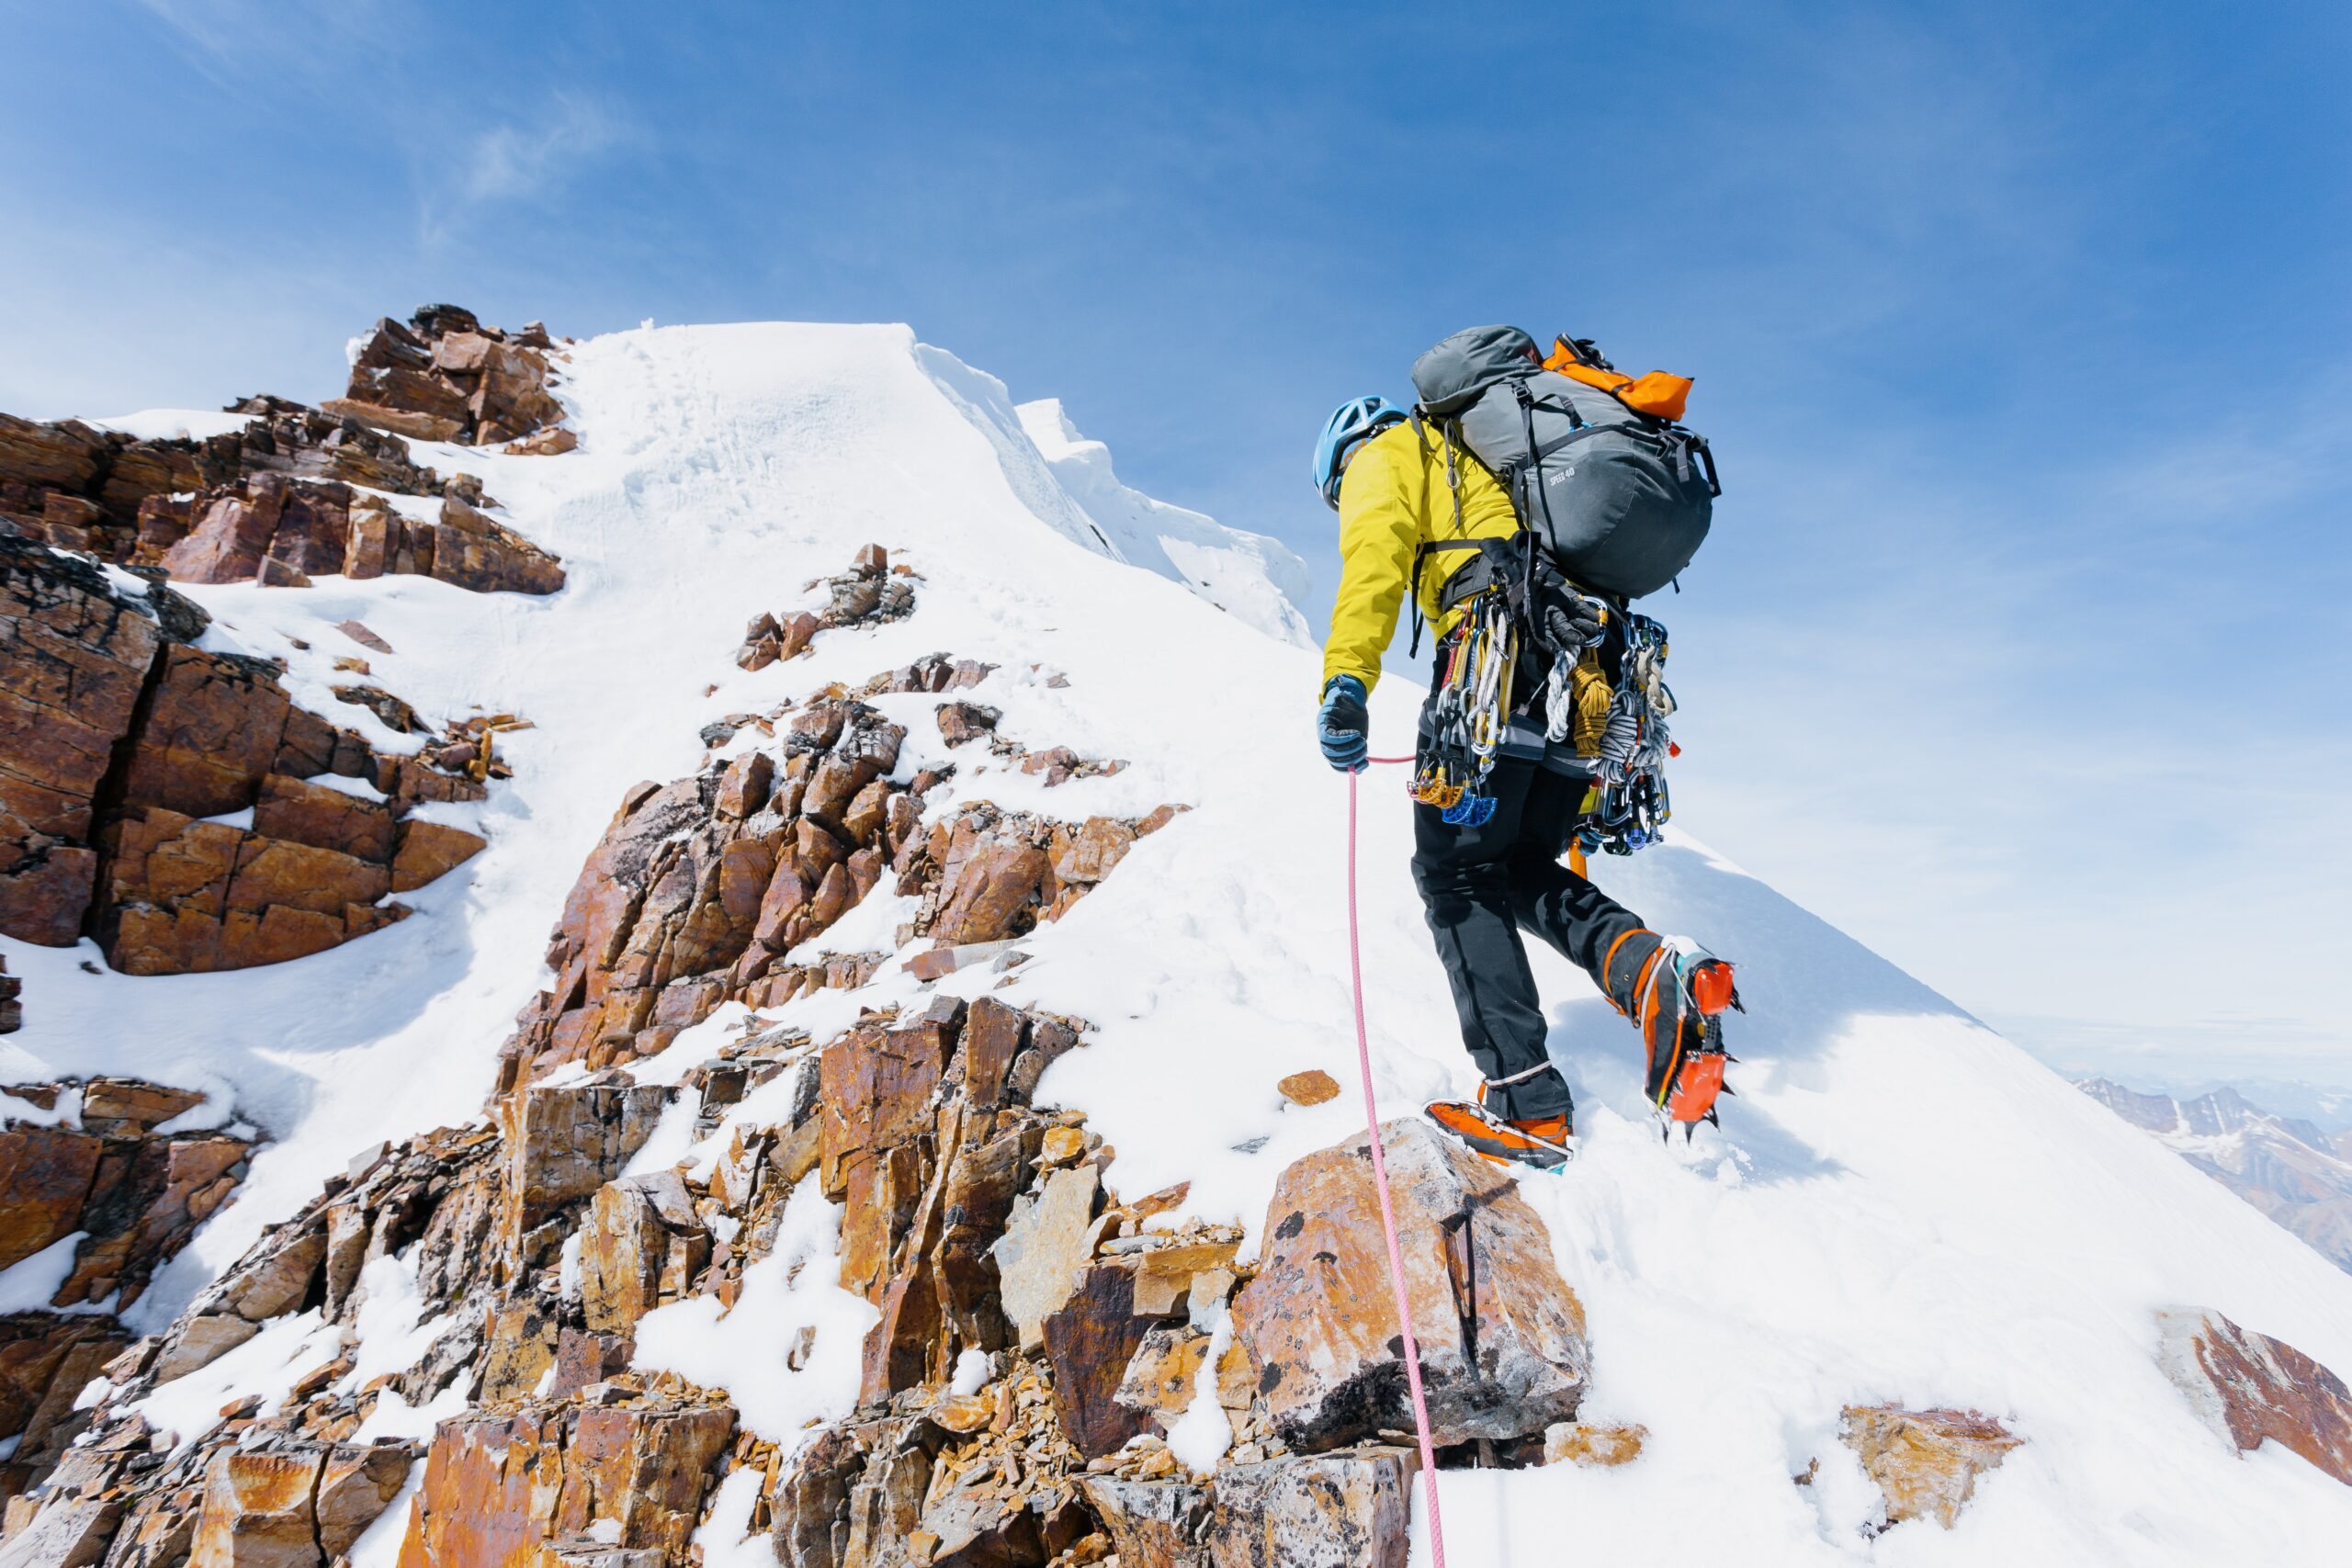 A mountaineer reaching the top of a snowy mountain